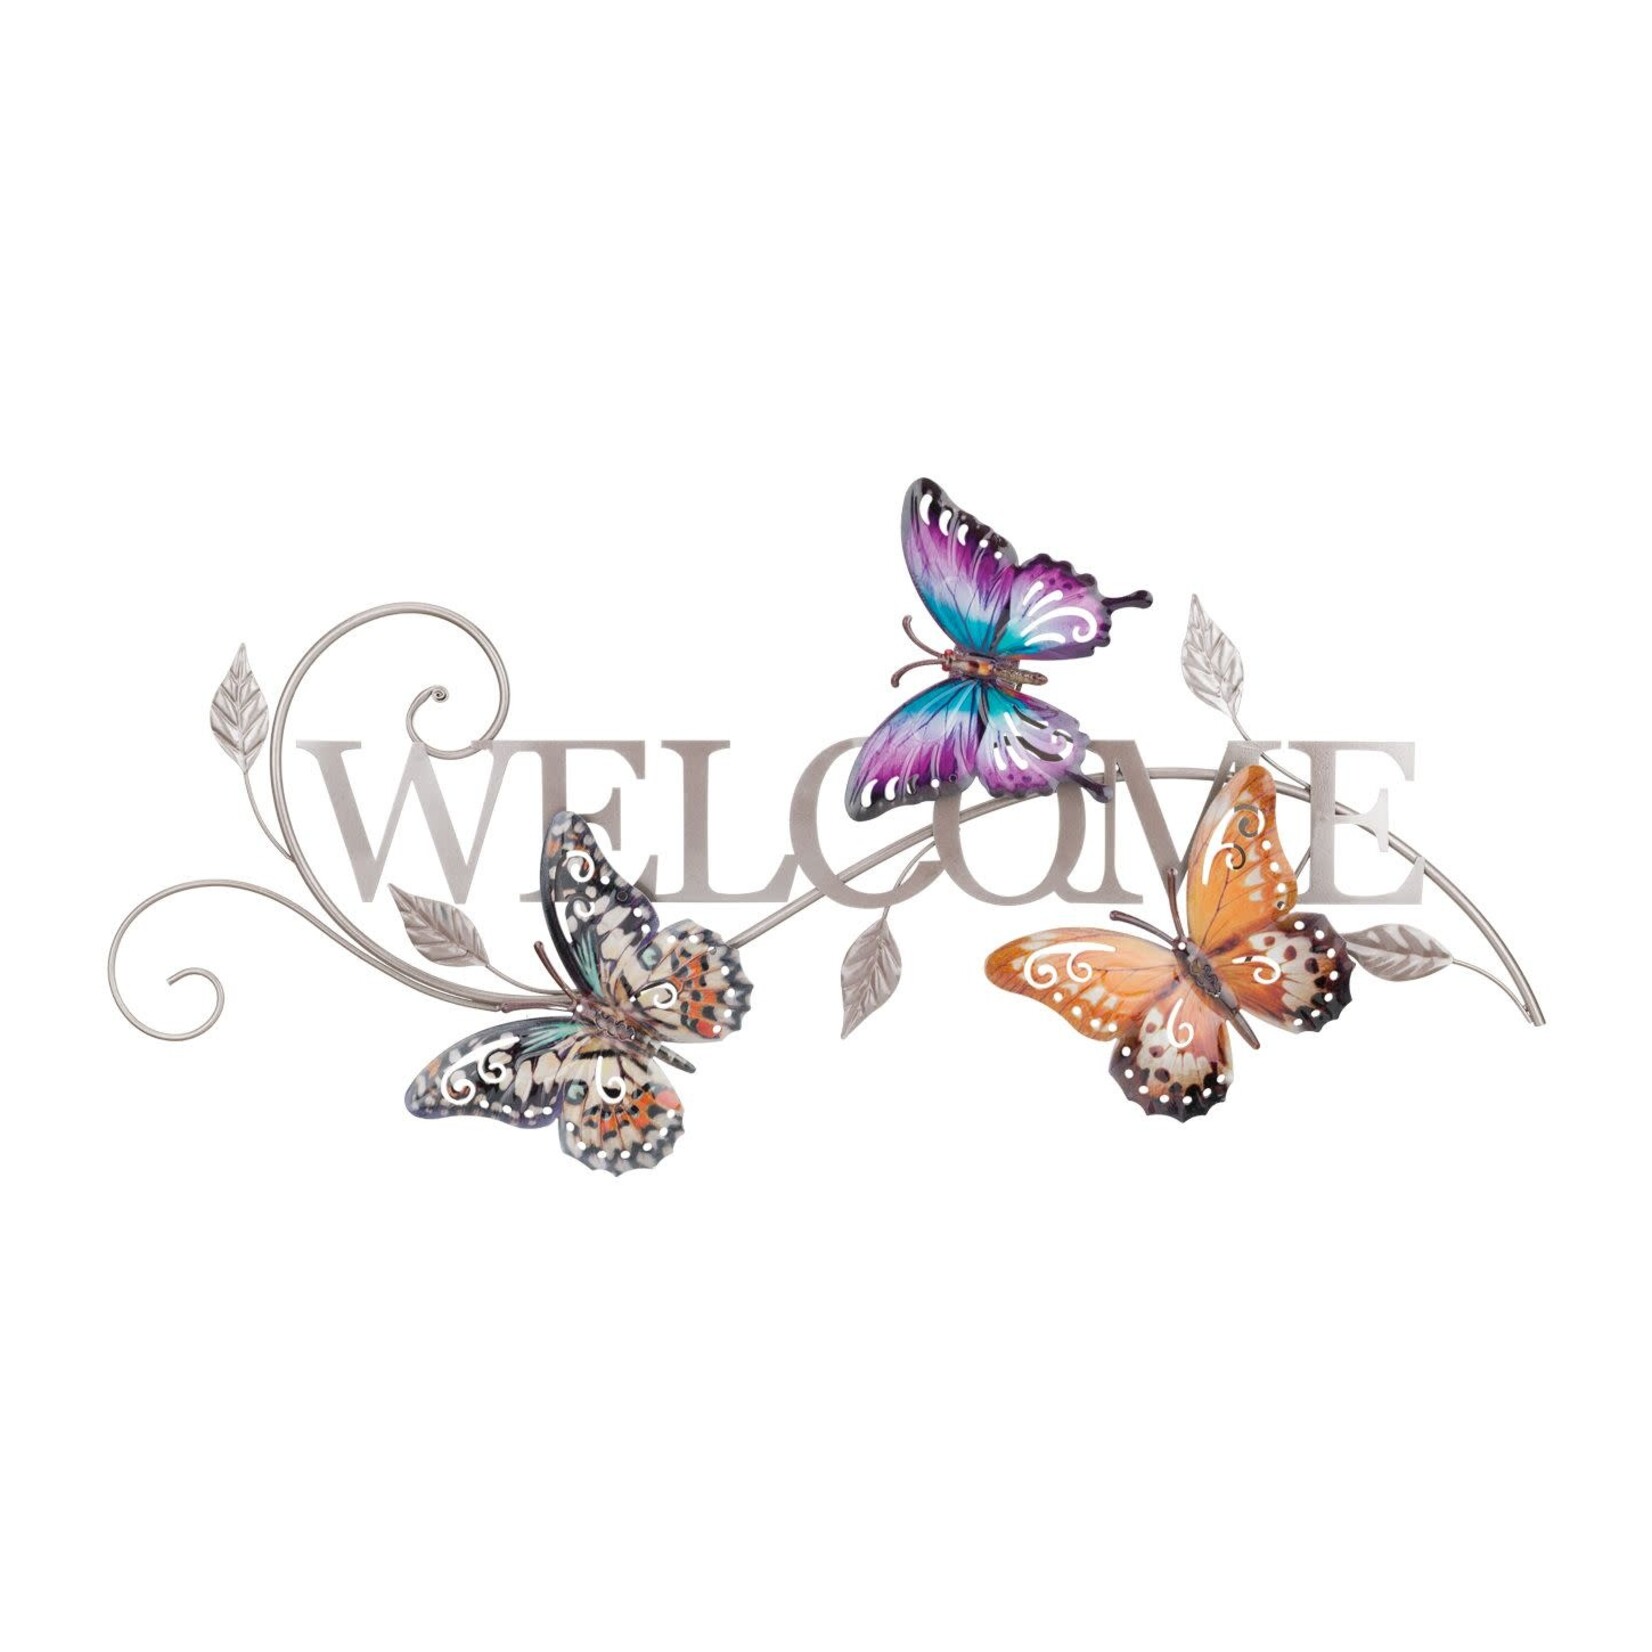 Regal Art & Gift Luster Welcome wall décor butterfly